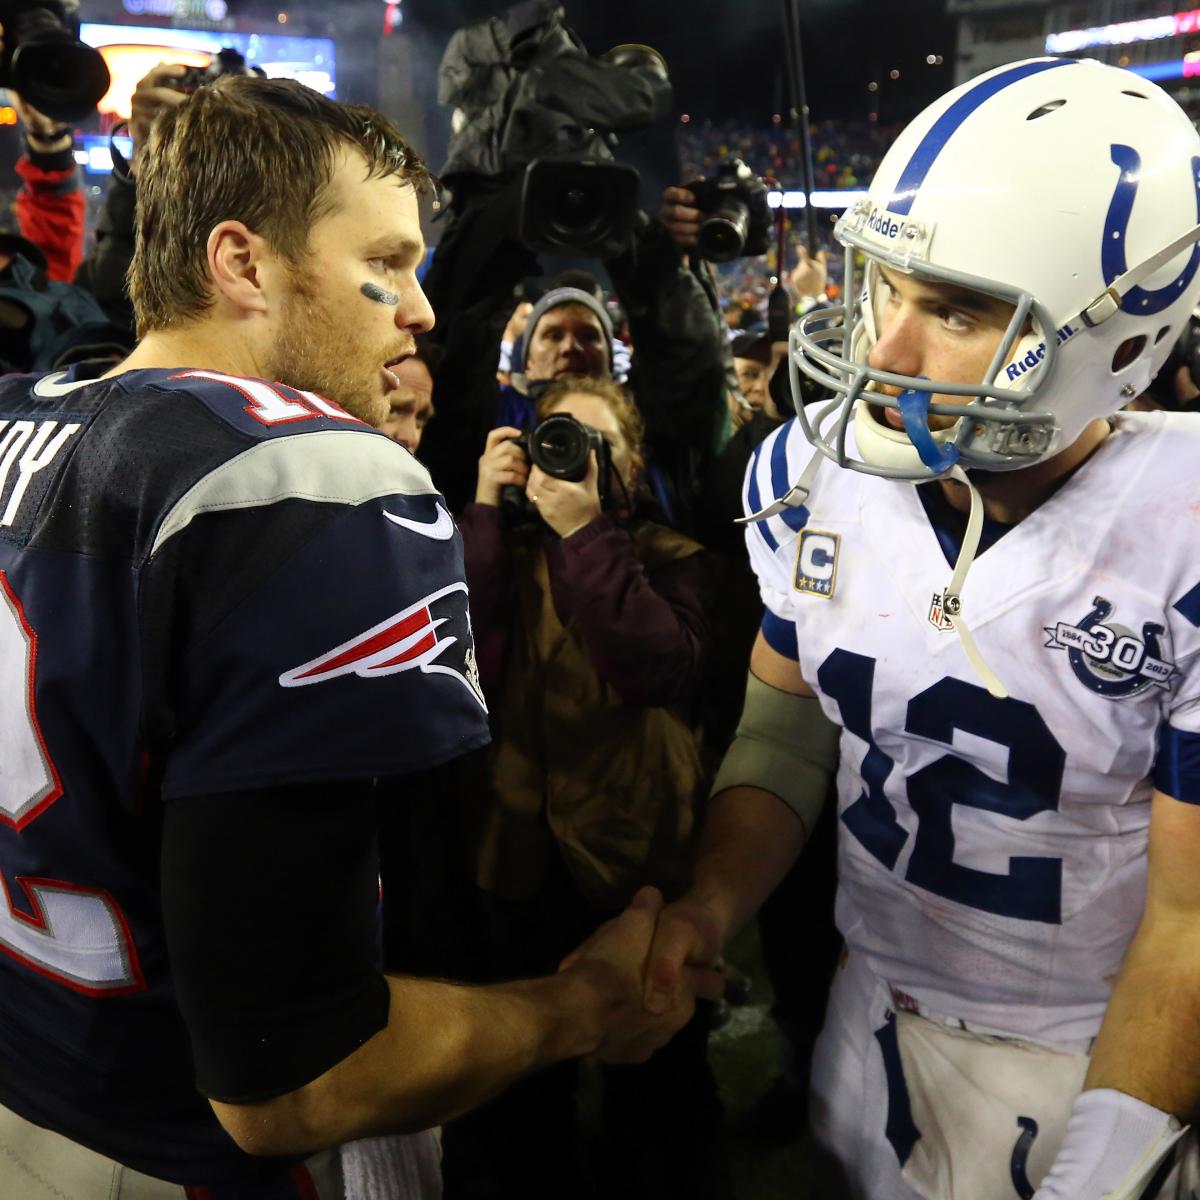 Colts vs. Patriots Complete AFC Championship Preview for New England